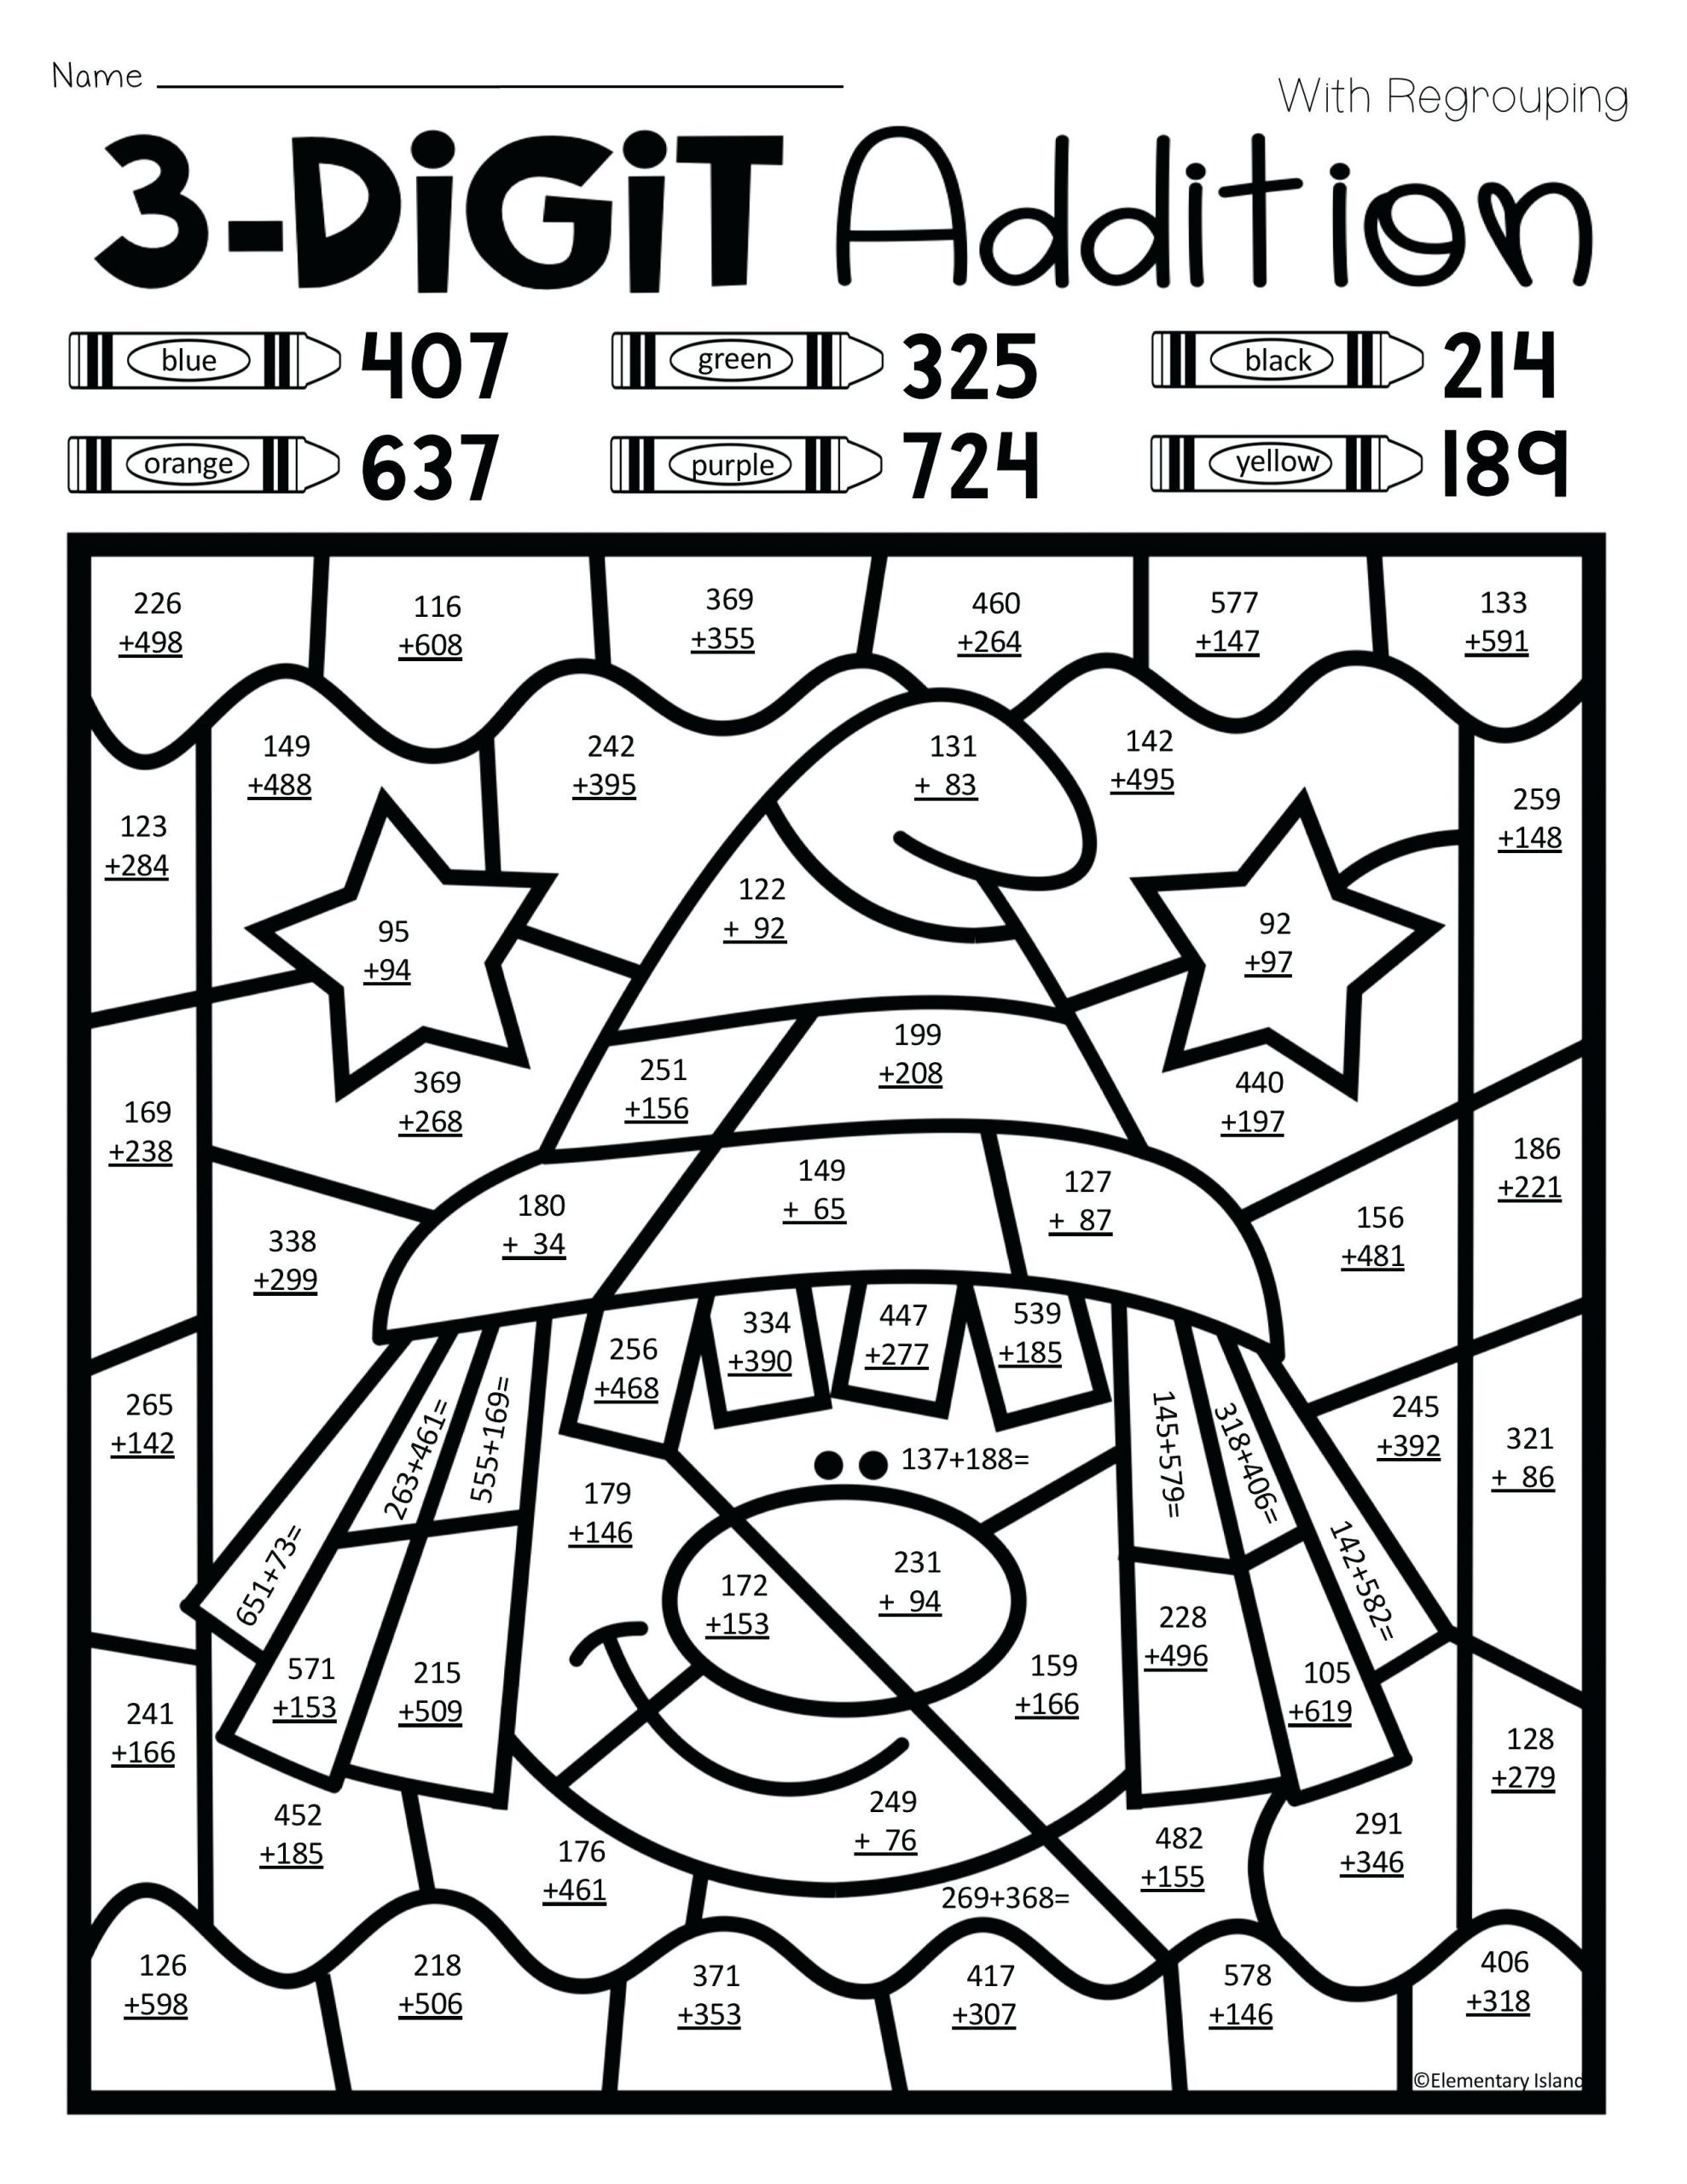 kindergartner spelling brain teaser maze grade science worksheets printable respiratory anatomy labeling quiz writing lessons practice drawing shapes reading and decimals 5th decimal place